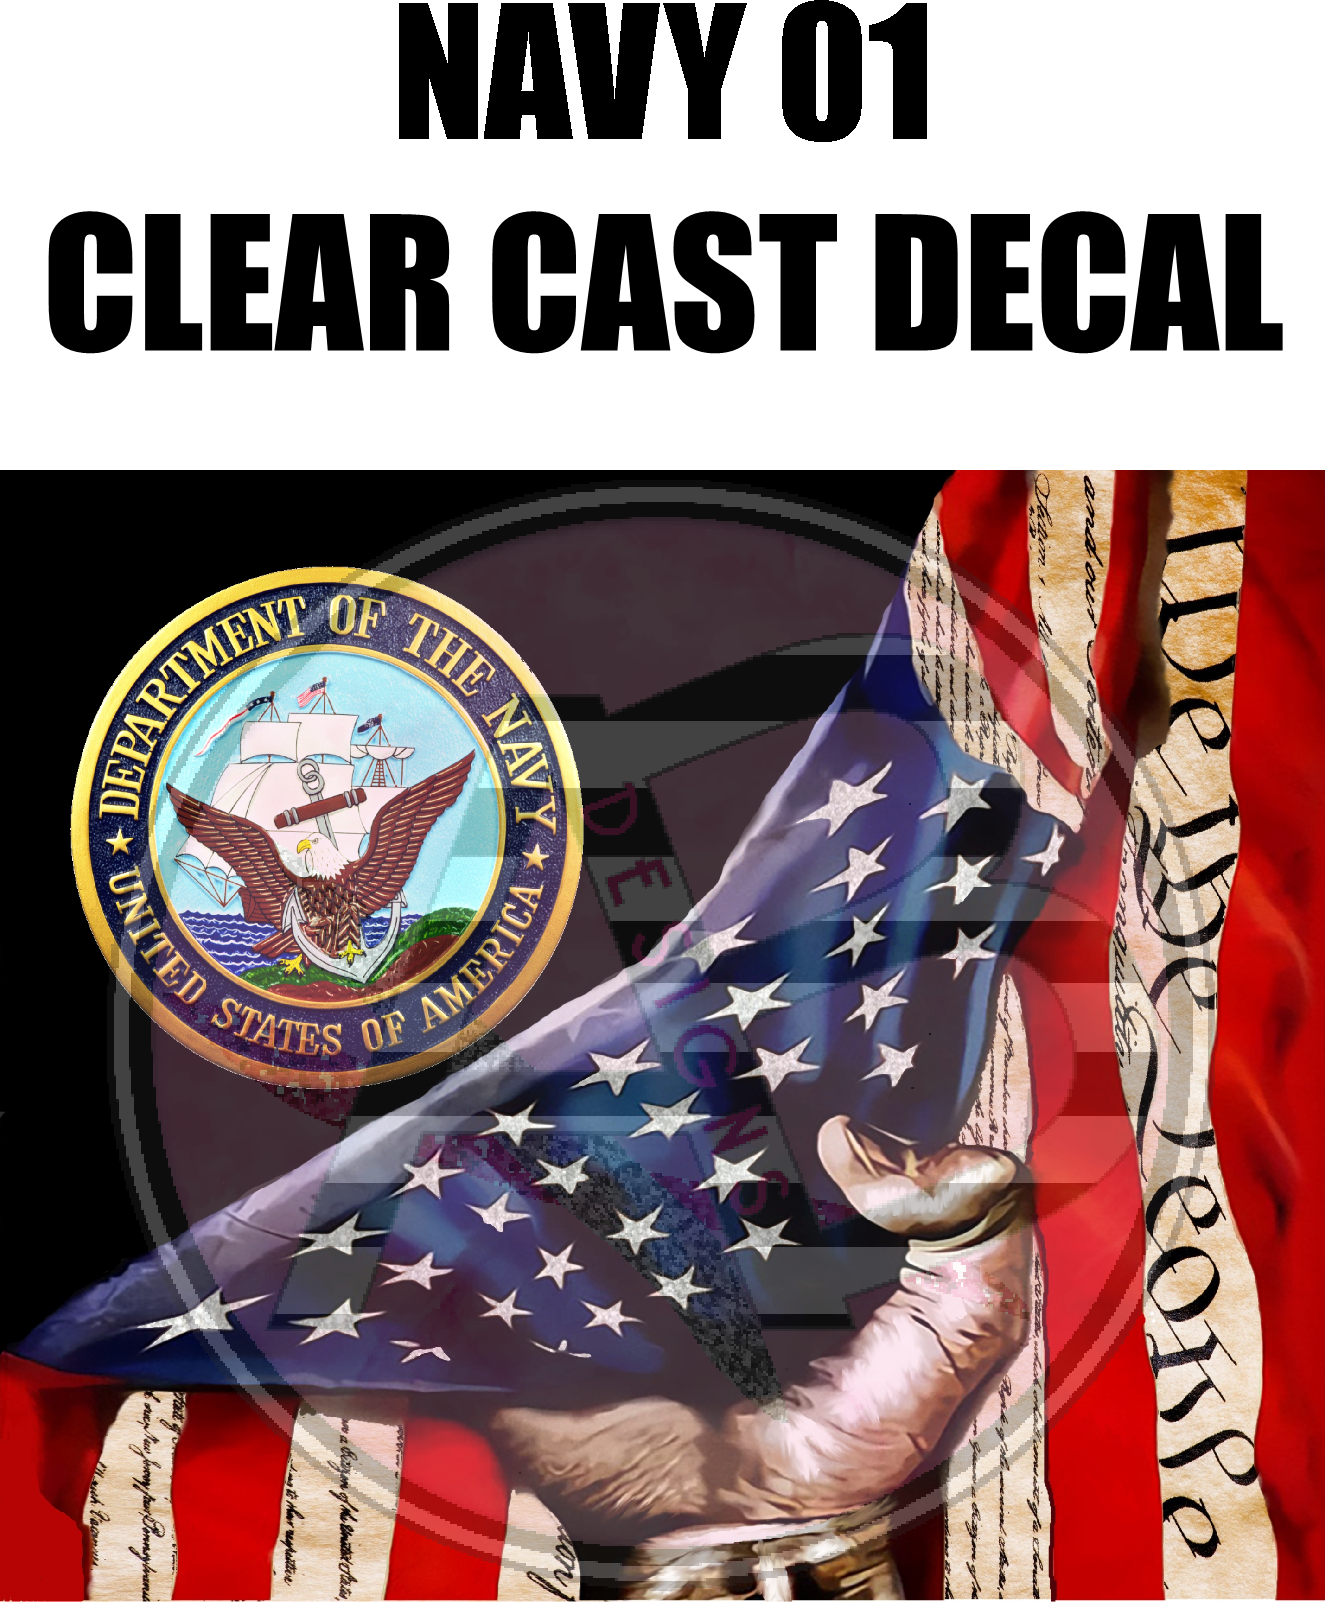 Navy 01 - Clear Cast Decal